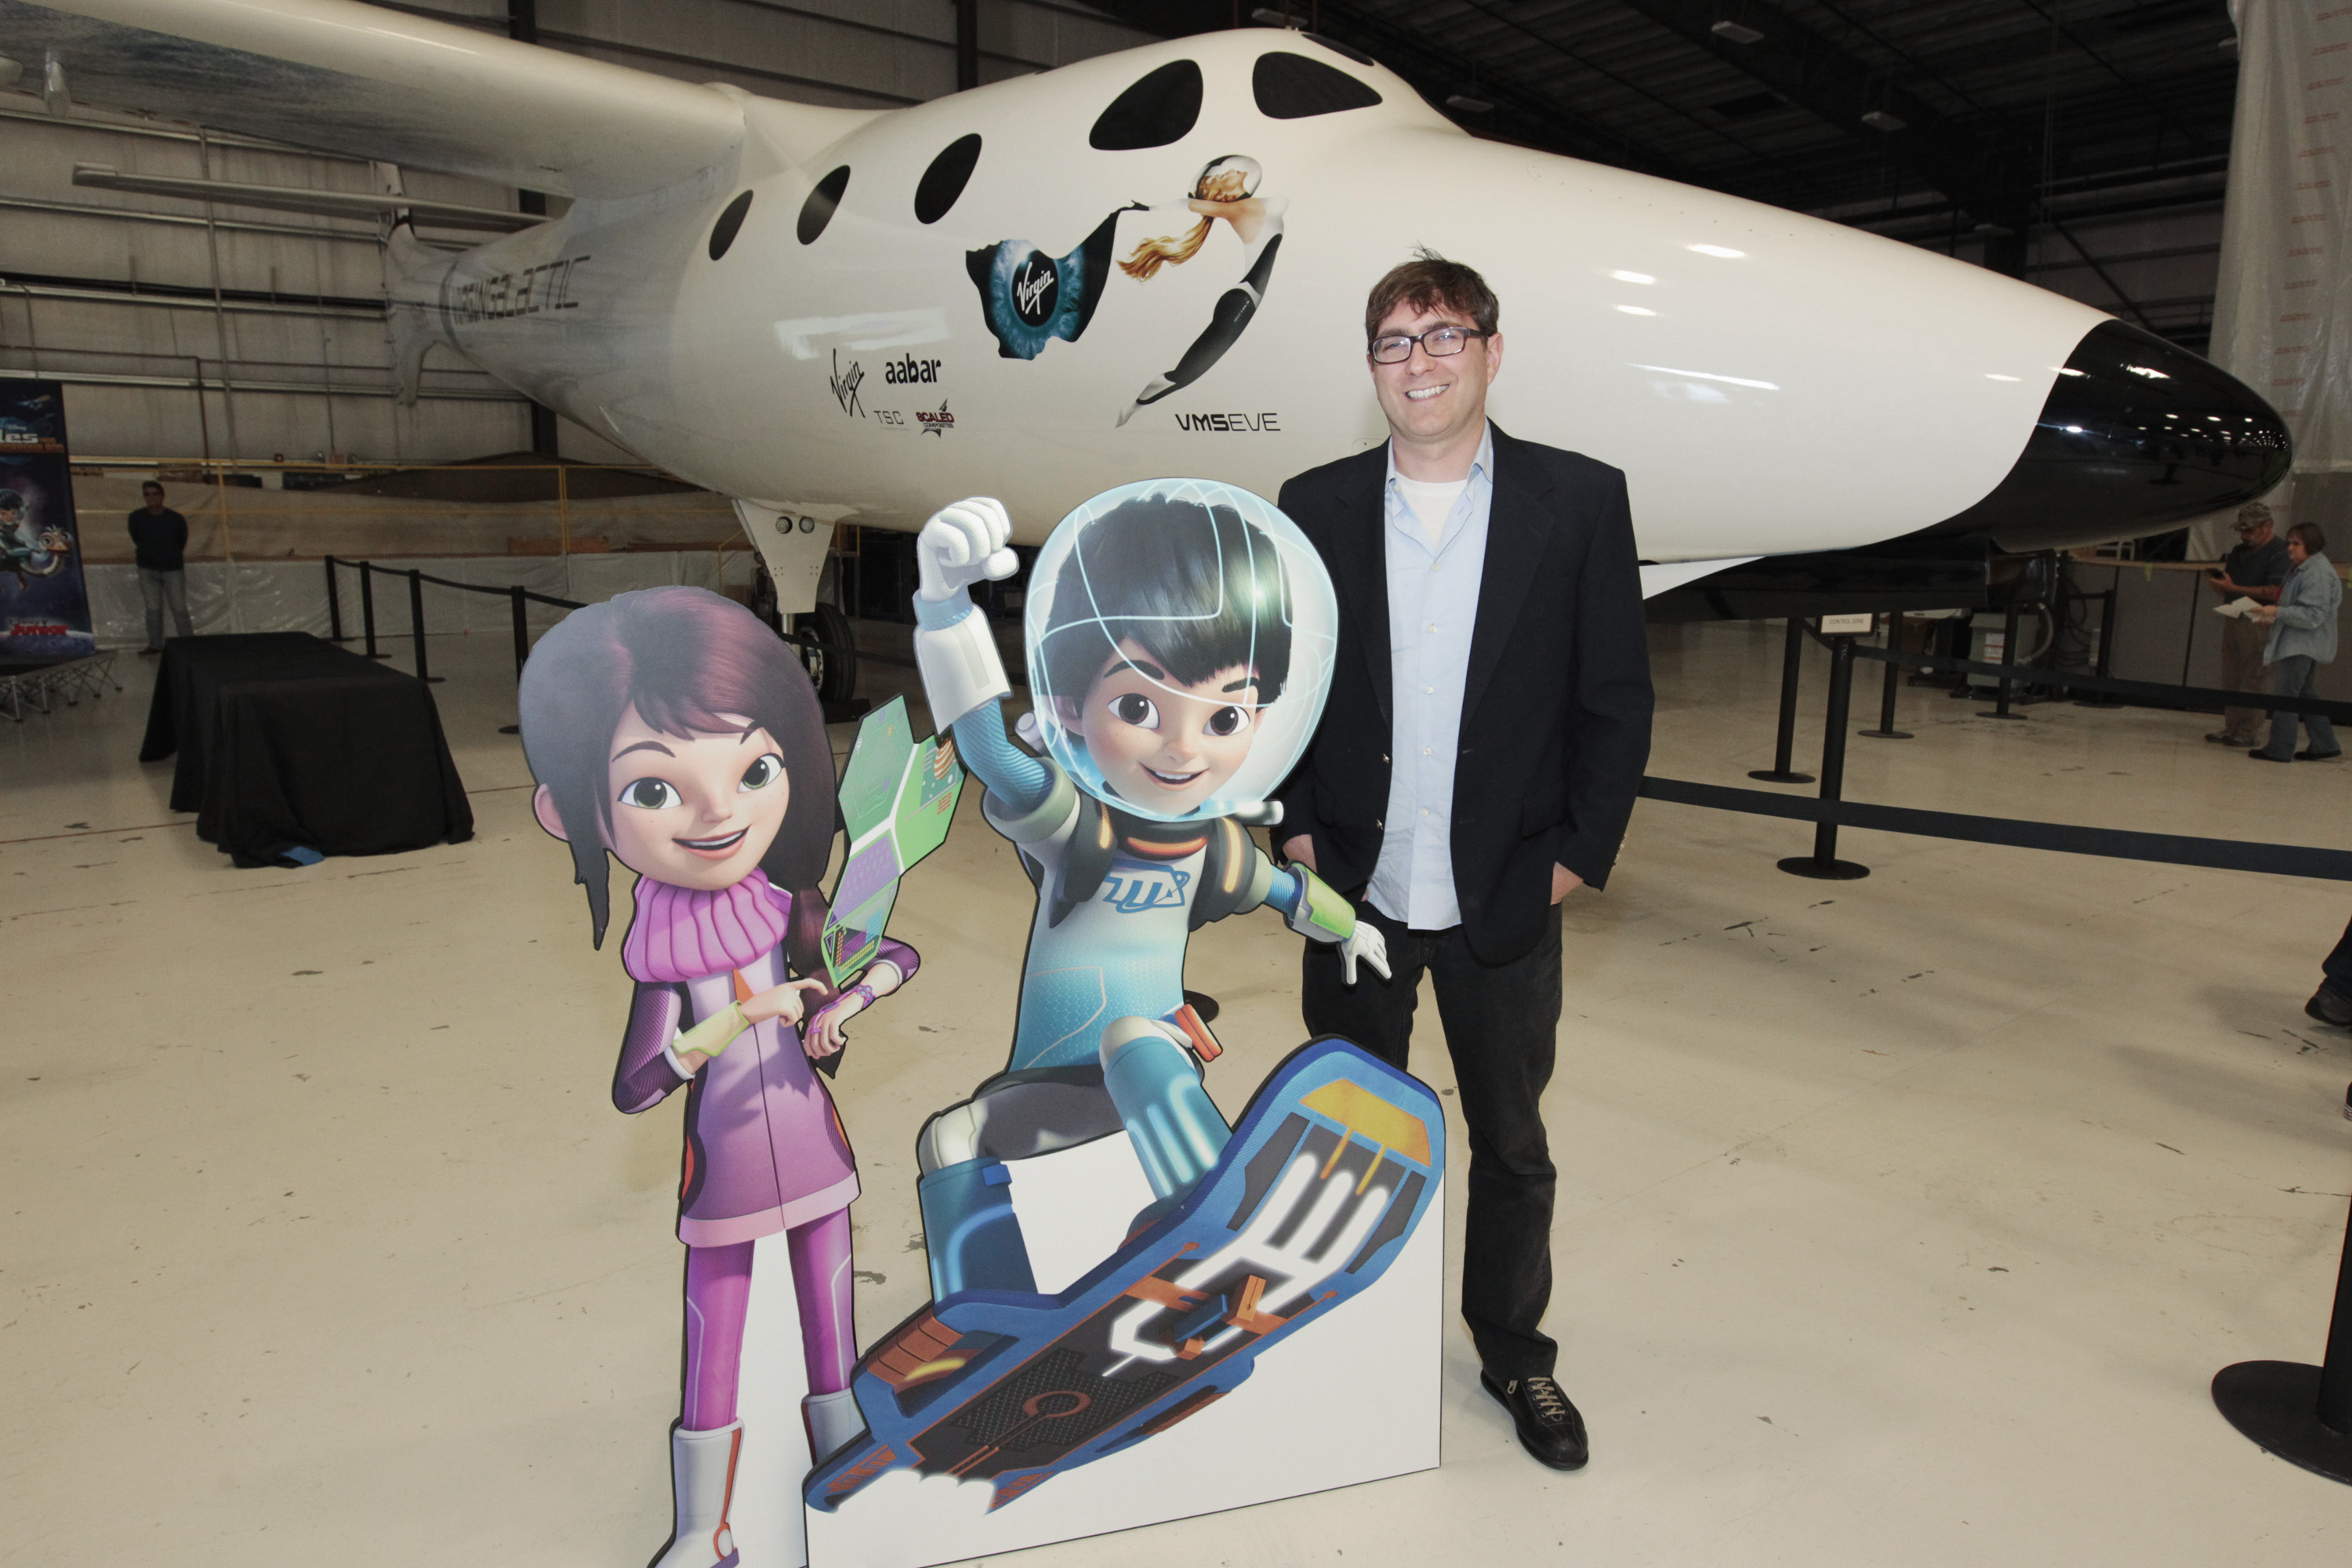 MILES FROM TOMORROWLAND - Disney Junior's "Miles from Tomorrowland" hosted a screening at the Virgin Galactic headquarters in Mojave, CA on Saturday, February 20. Series creator and executive producer Sascha Paladino along with Disney Junior and Virgin Galactic executives were in attendance. (Disney Junior/Rick Rowell) SASCHA PALADINO (CREATOR/EXECUTIVE PRODUCER, "MILES FROM TOMORROWLAND")